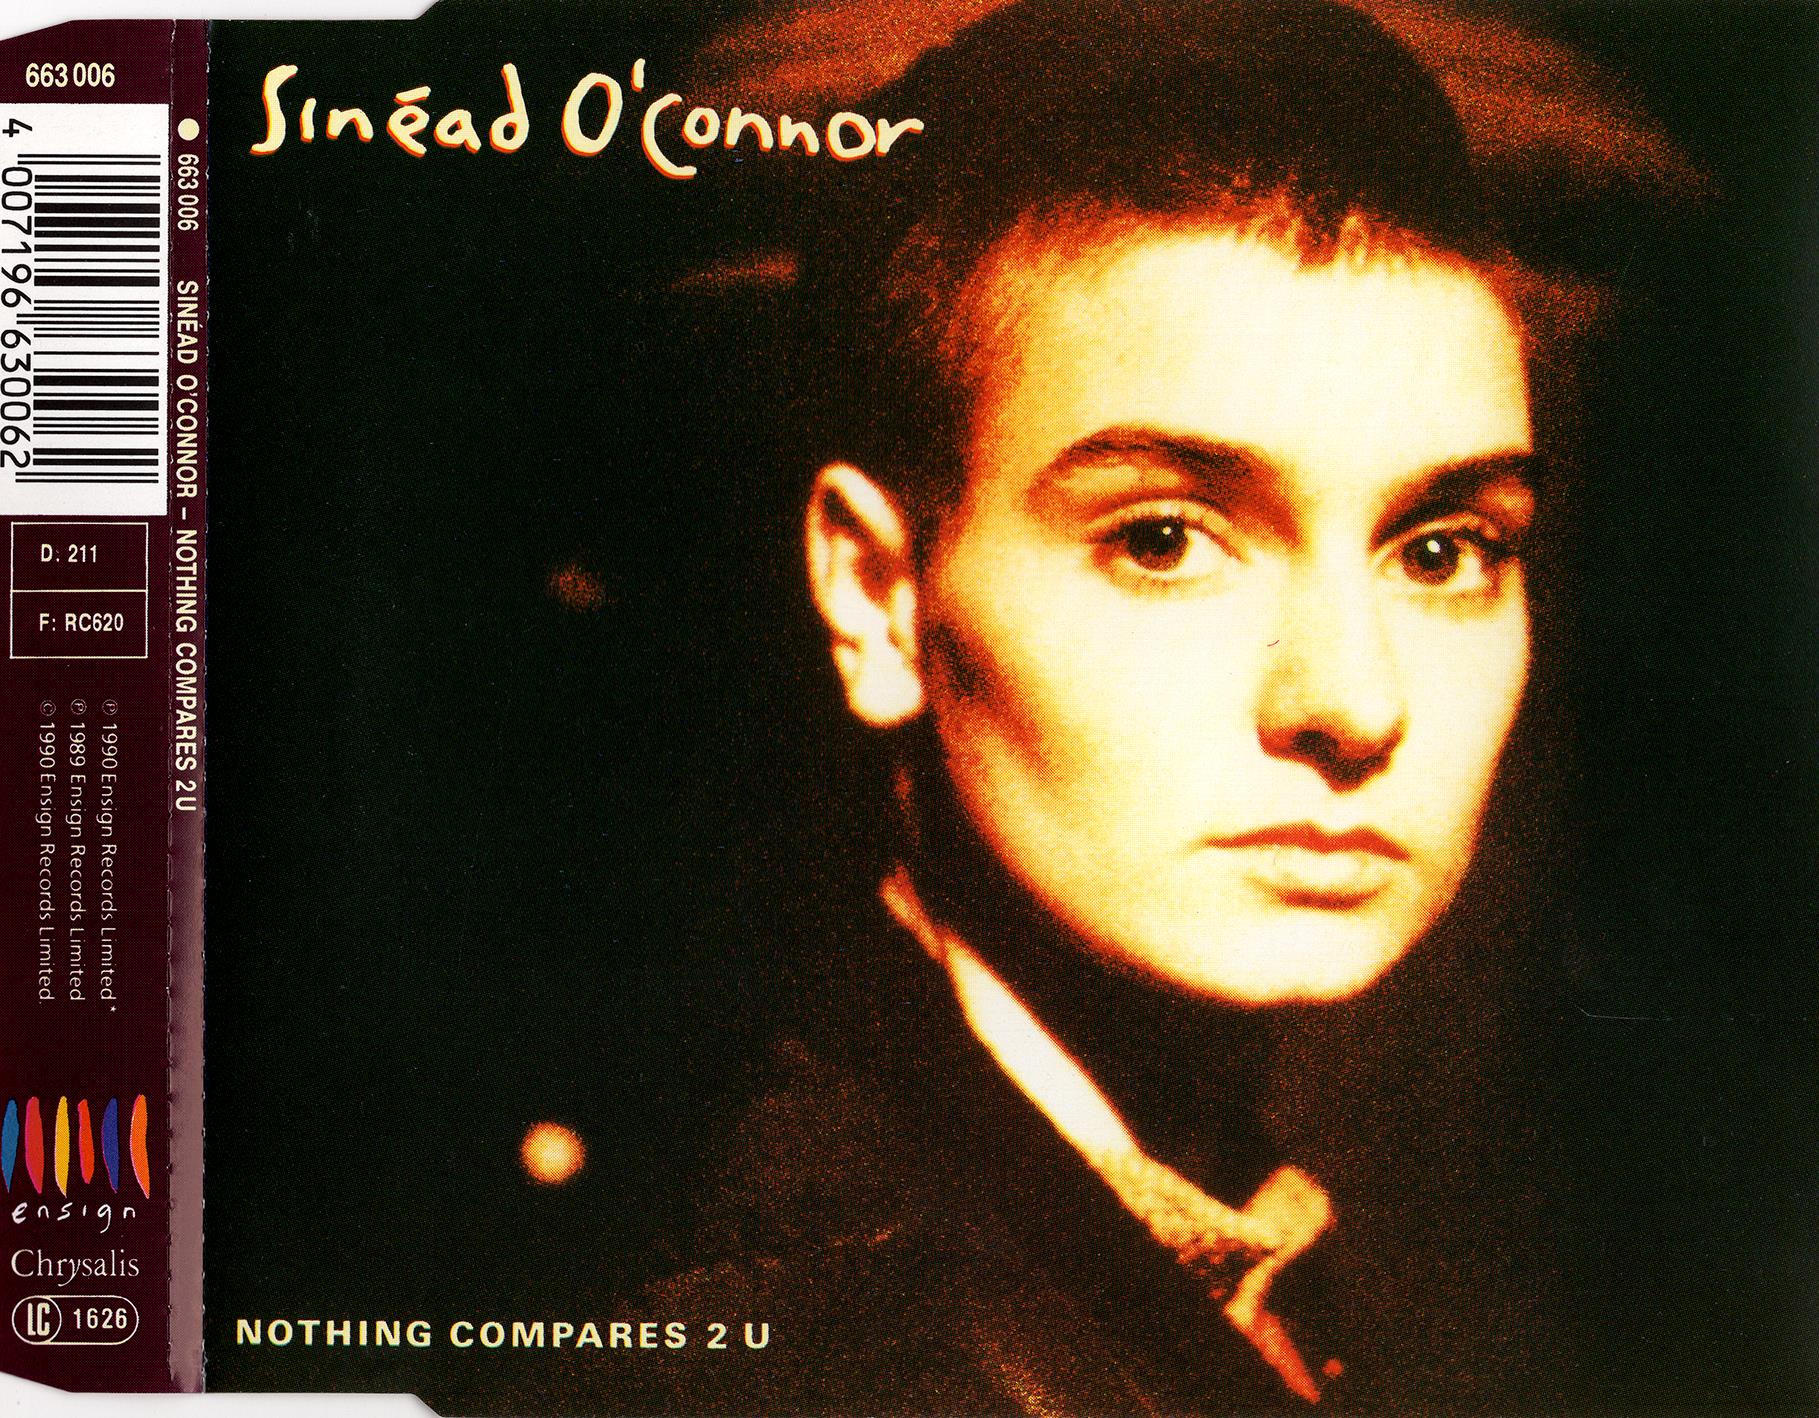 Sinéad O'Connor - Nothing Compares 2U (Cdm)[1989]